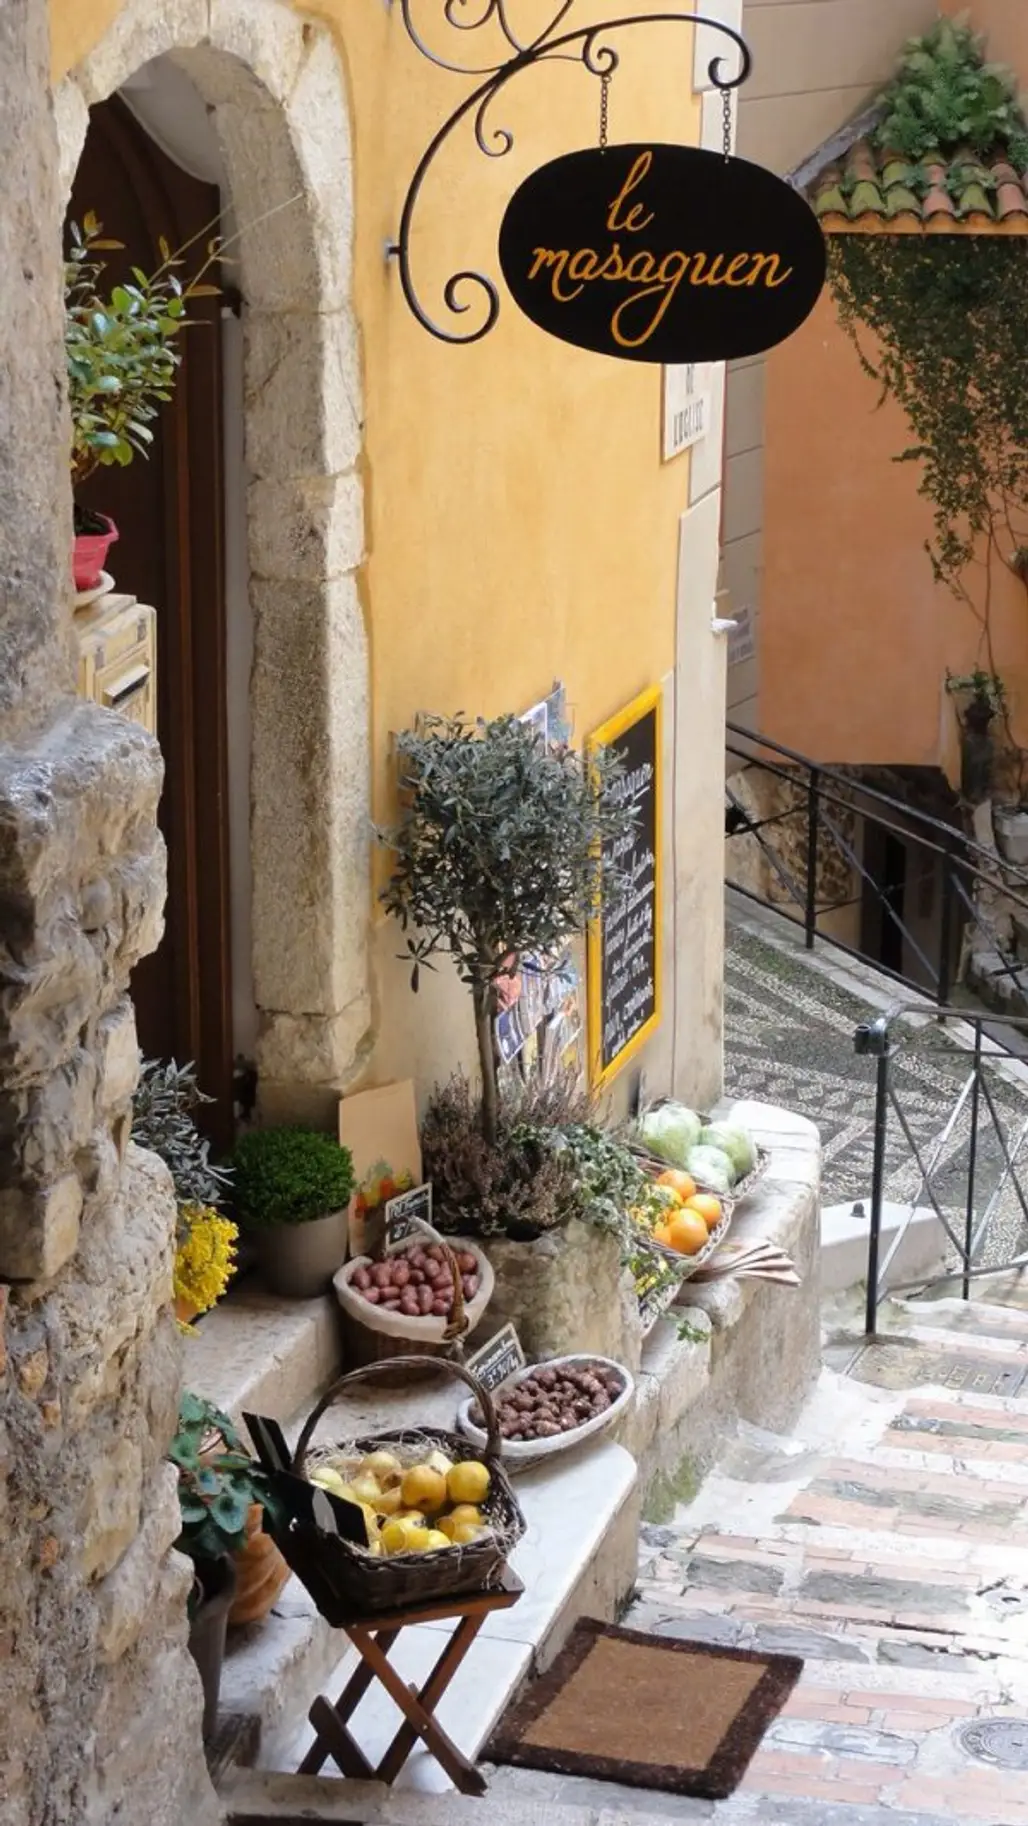 Drop in for Lunch in a Typical Provencal Bistro